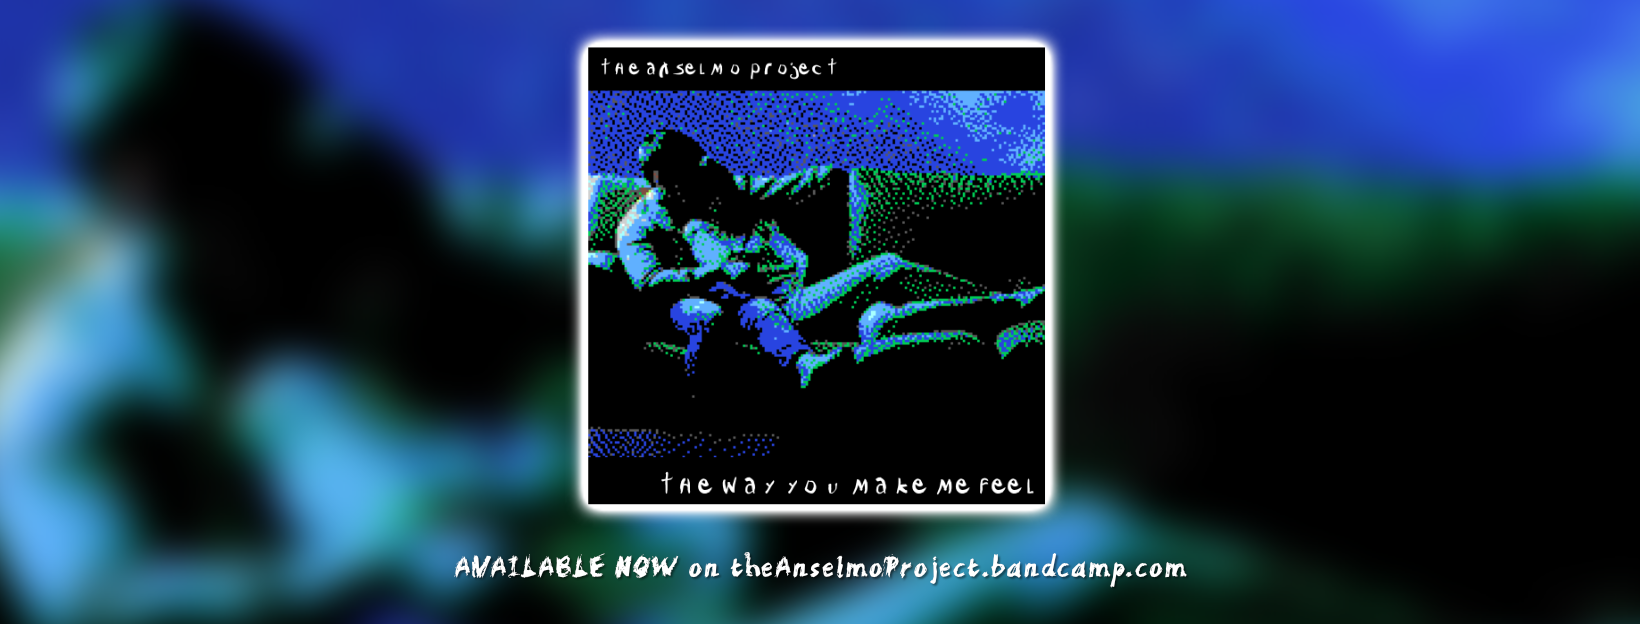 The Anselmo Project - The Way You Make Me Feel